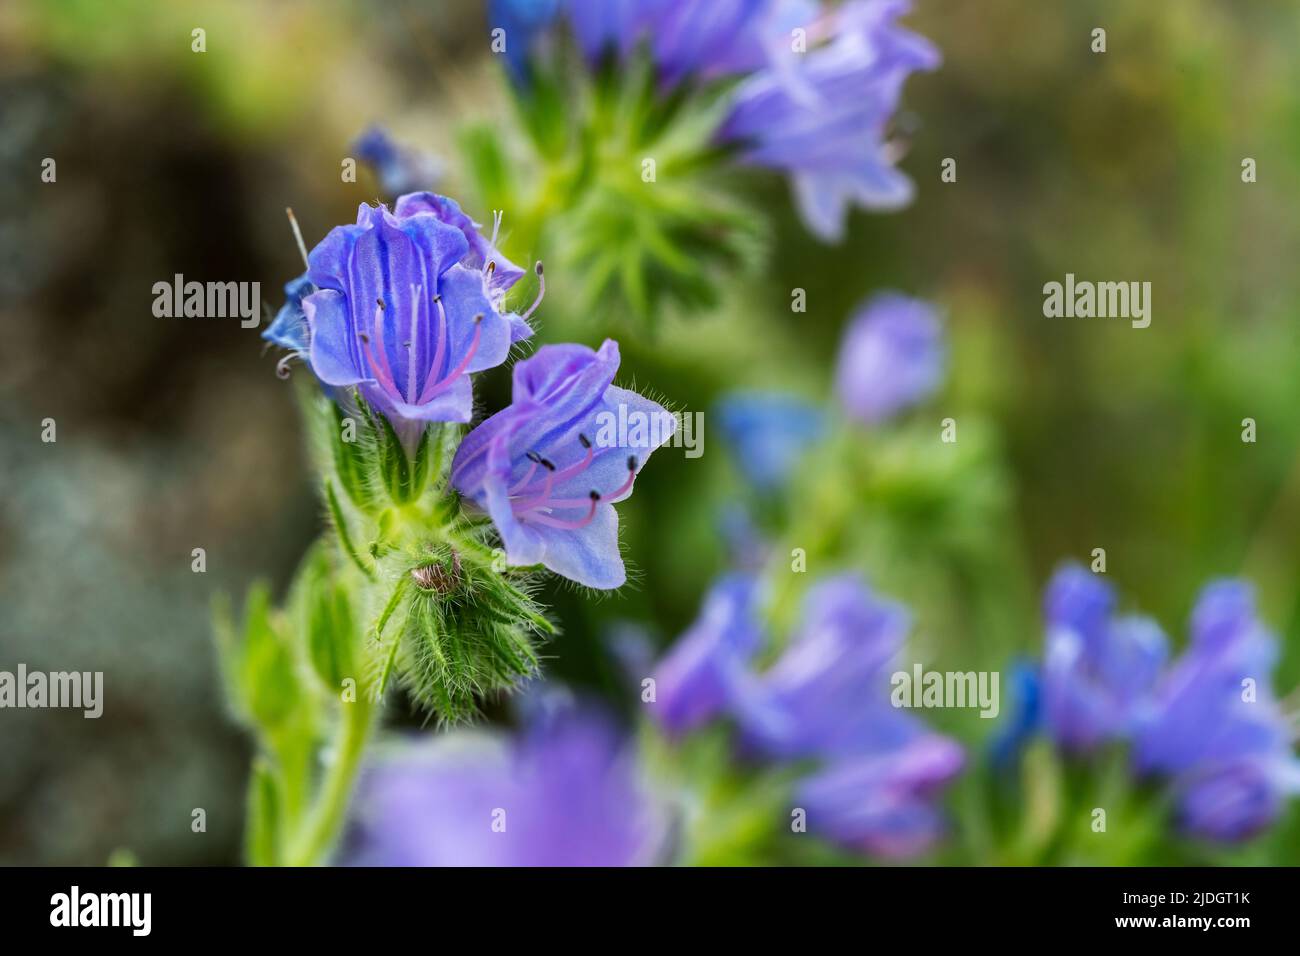 Macro photo of blue melliferious flower of Echium plantagineum commonly known as viper s bugloss and blue weed. Selective focus. Stock Photo